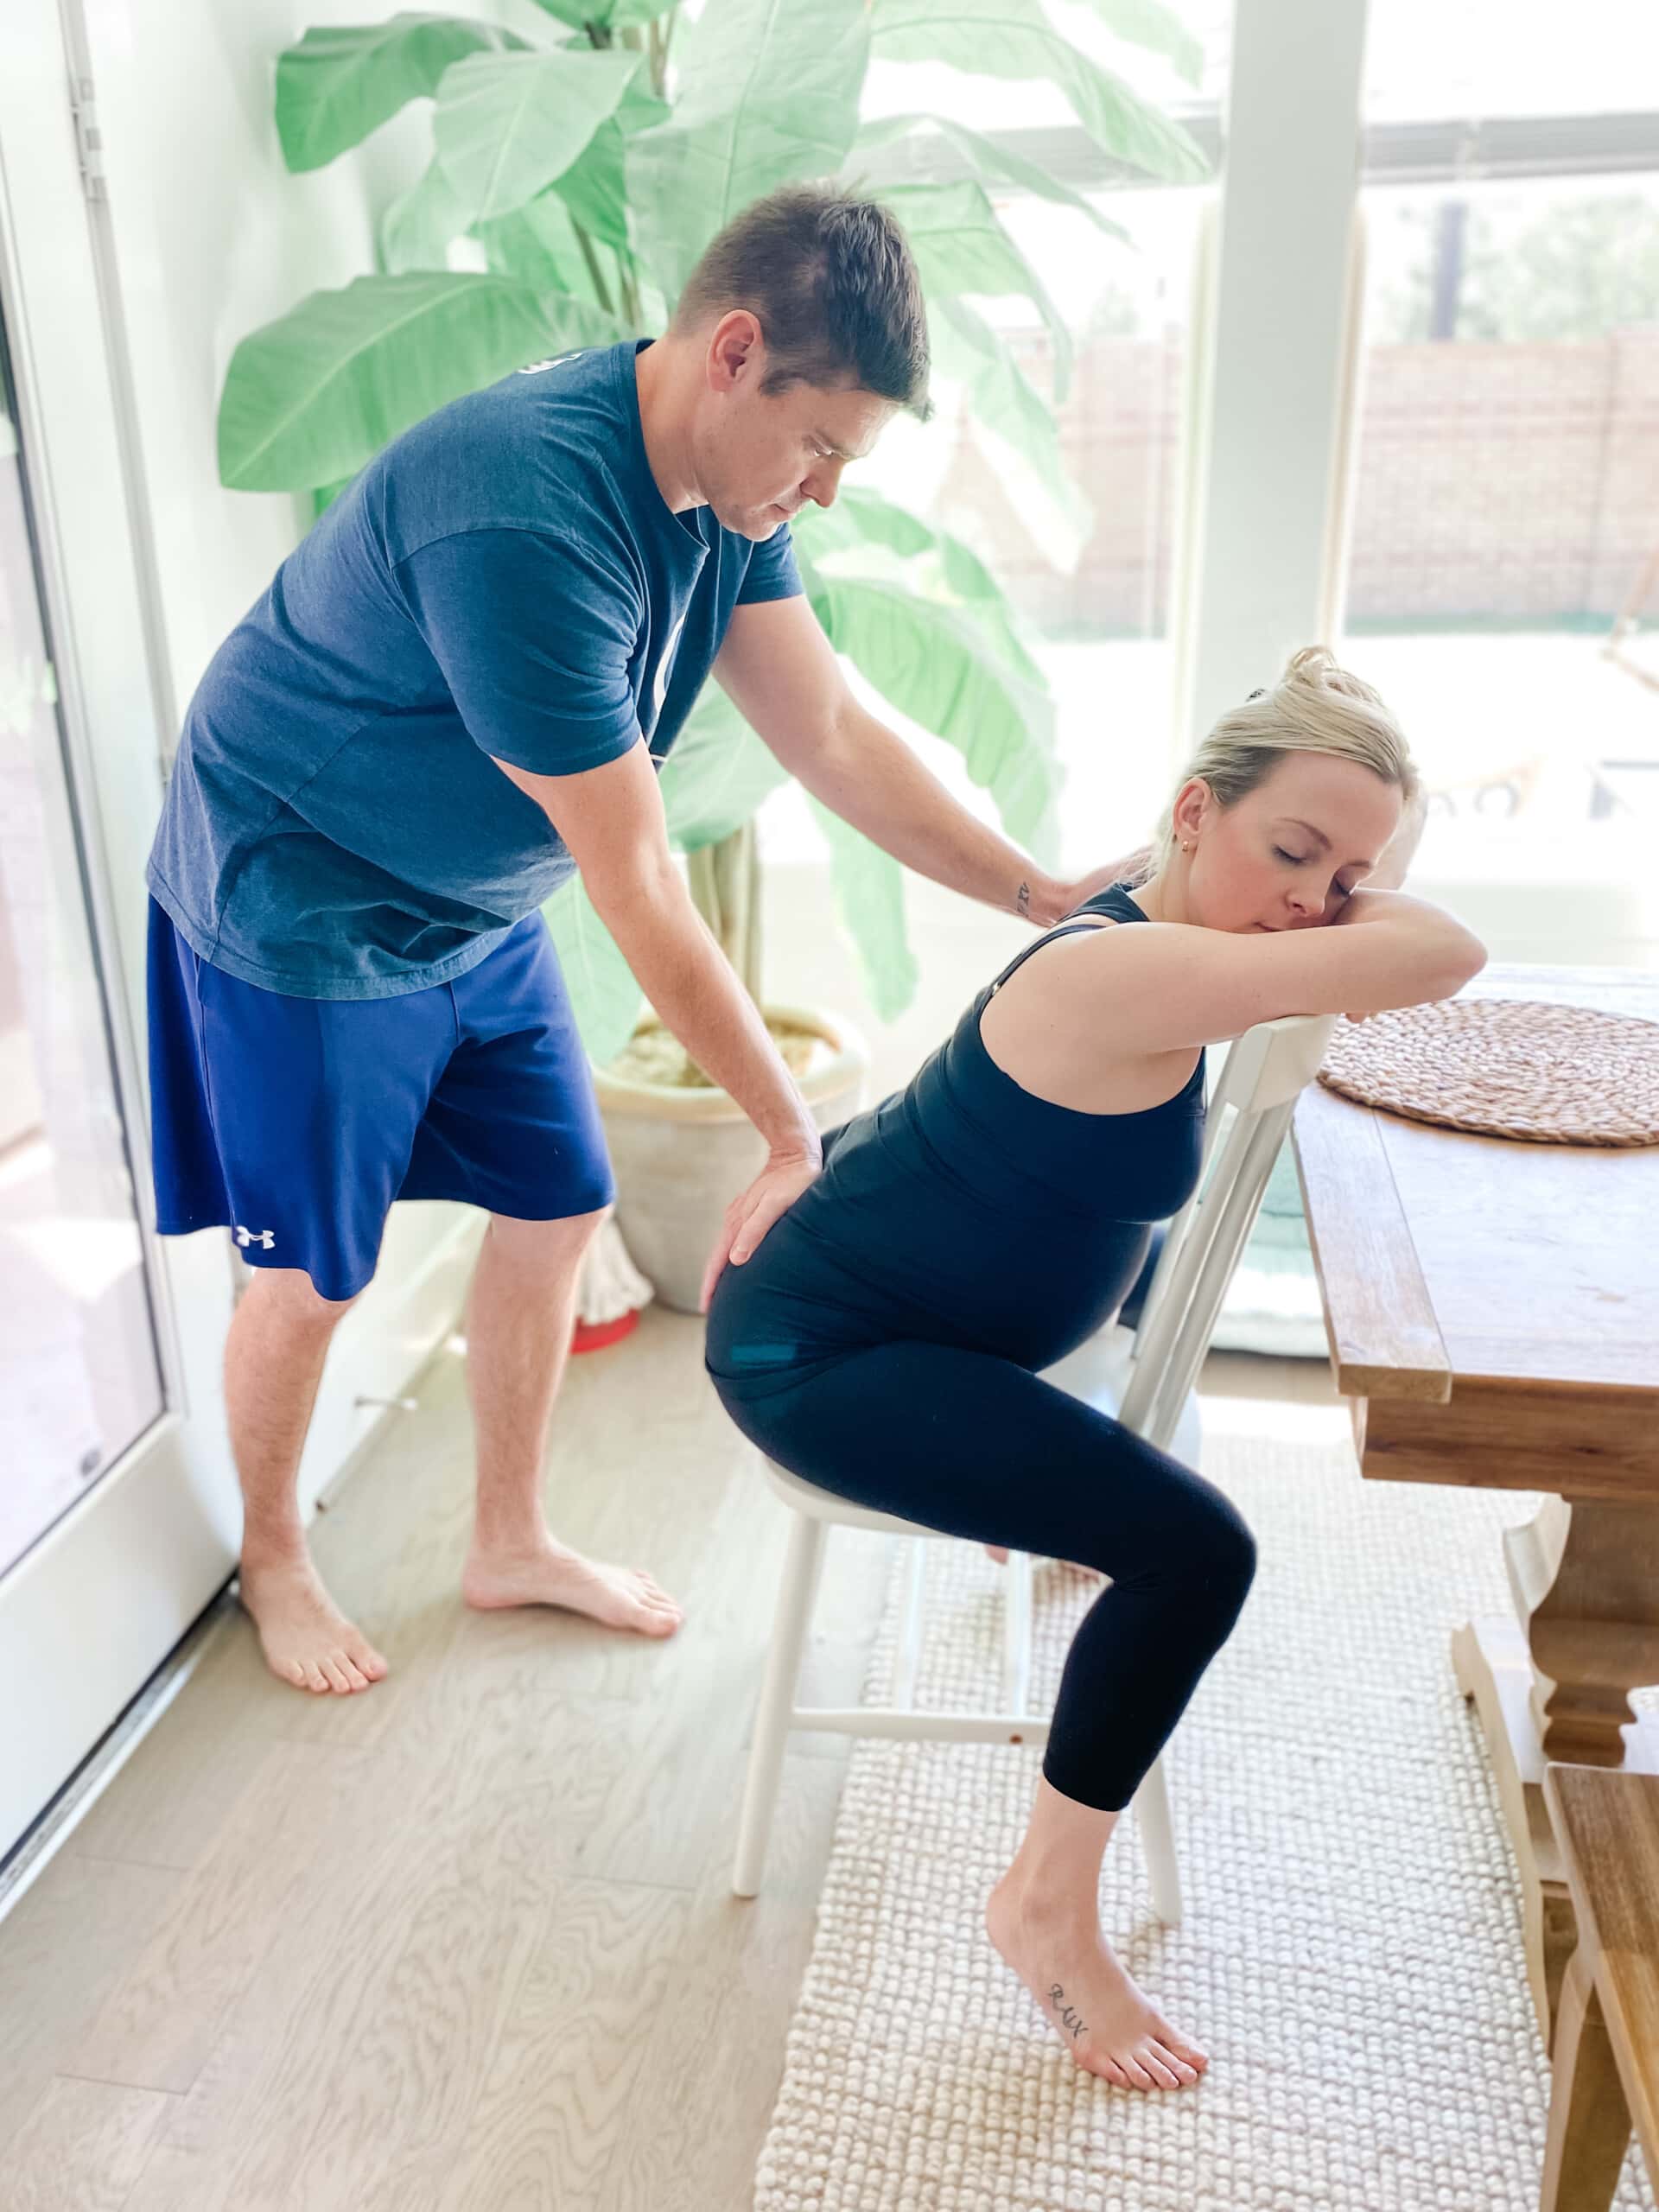 Husband doing counter pressure on his wife's lower back.